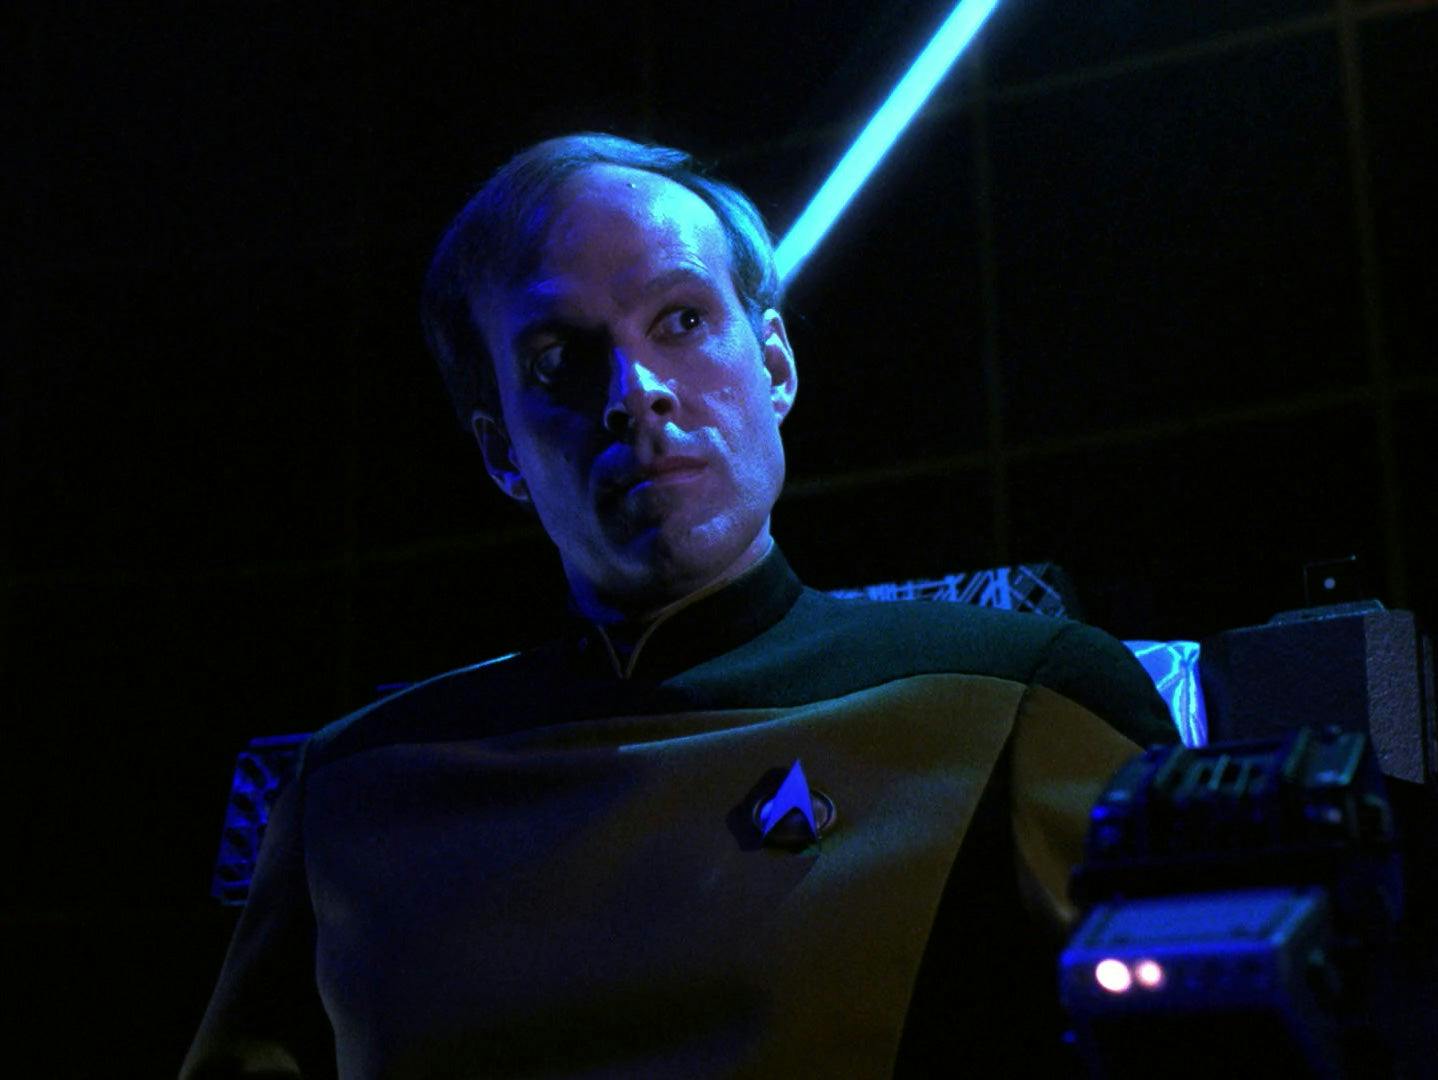 A pensive Reginald Barclay looks to the side in Star Trek: The Next Generation - The Nth Degree